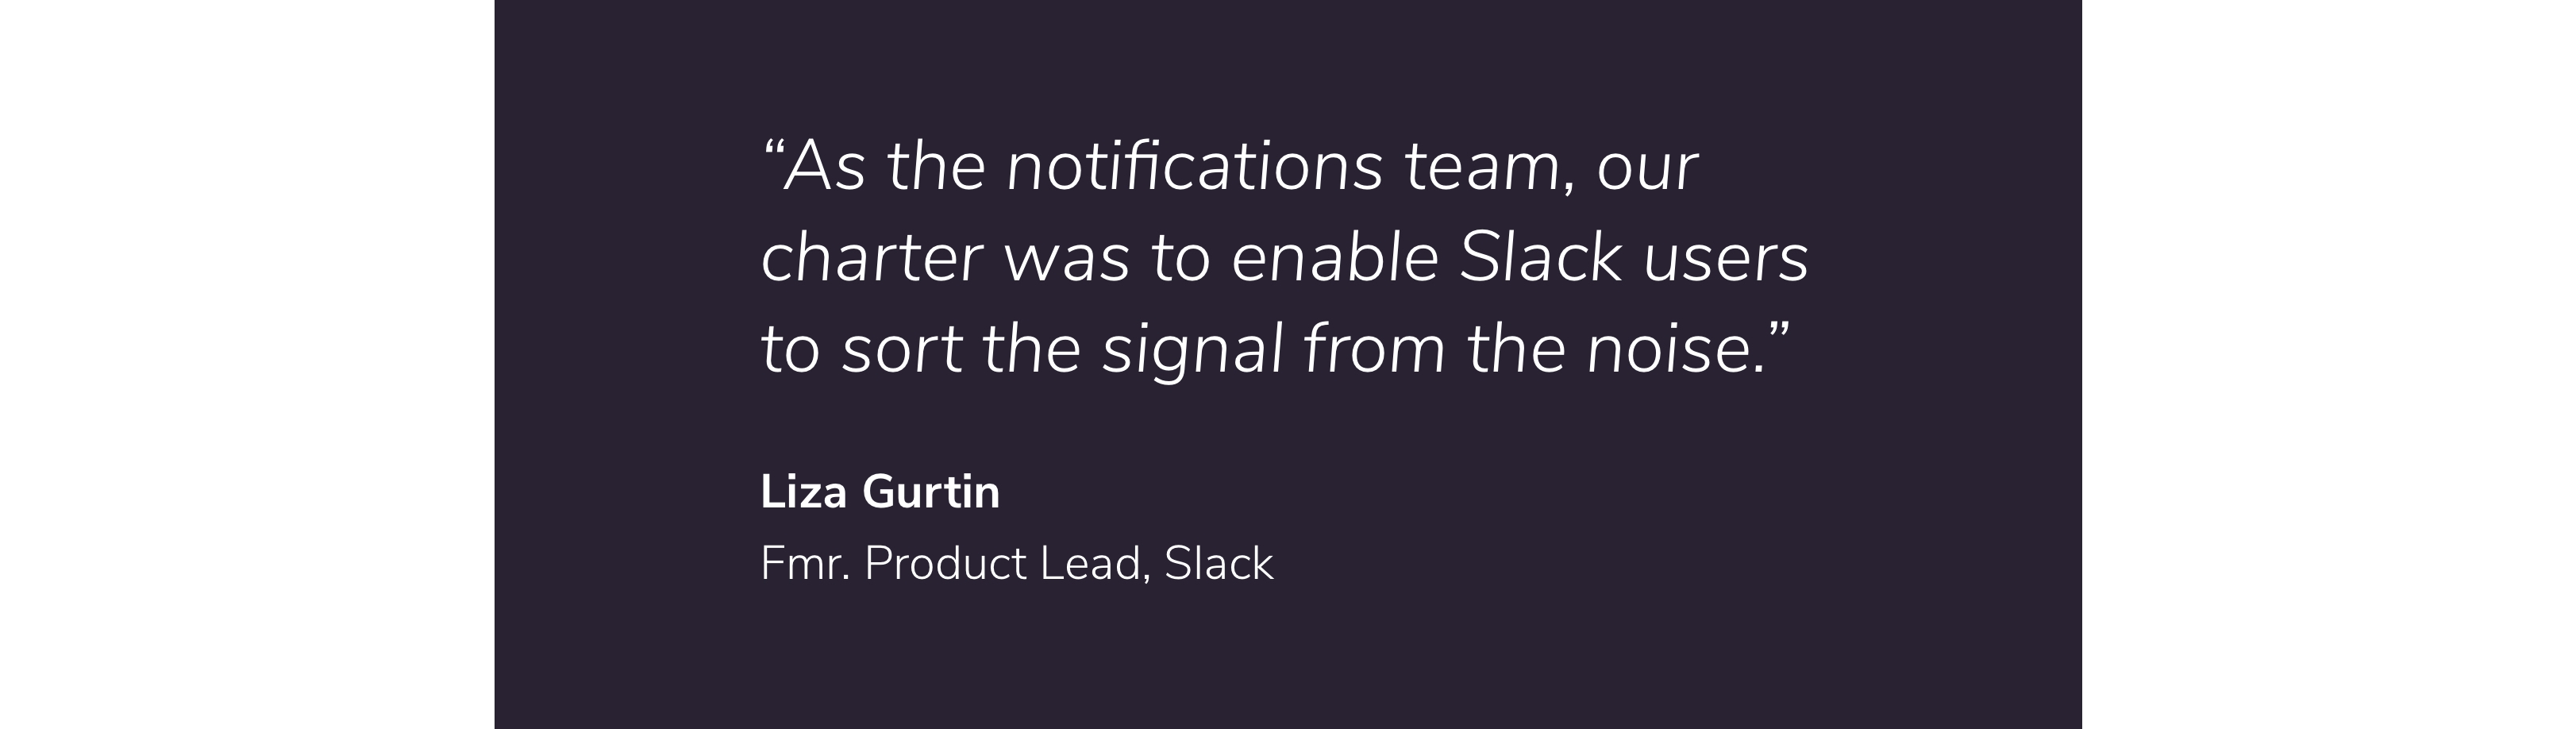 Slack's Liza Gurtin on the charter for the notifications team